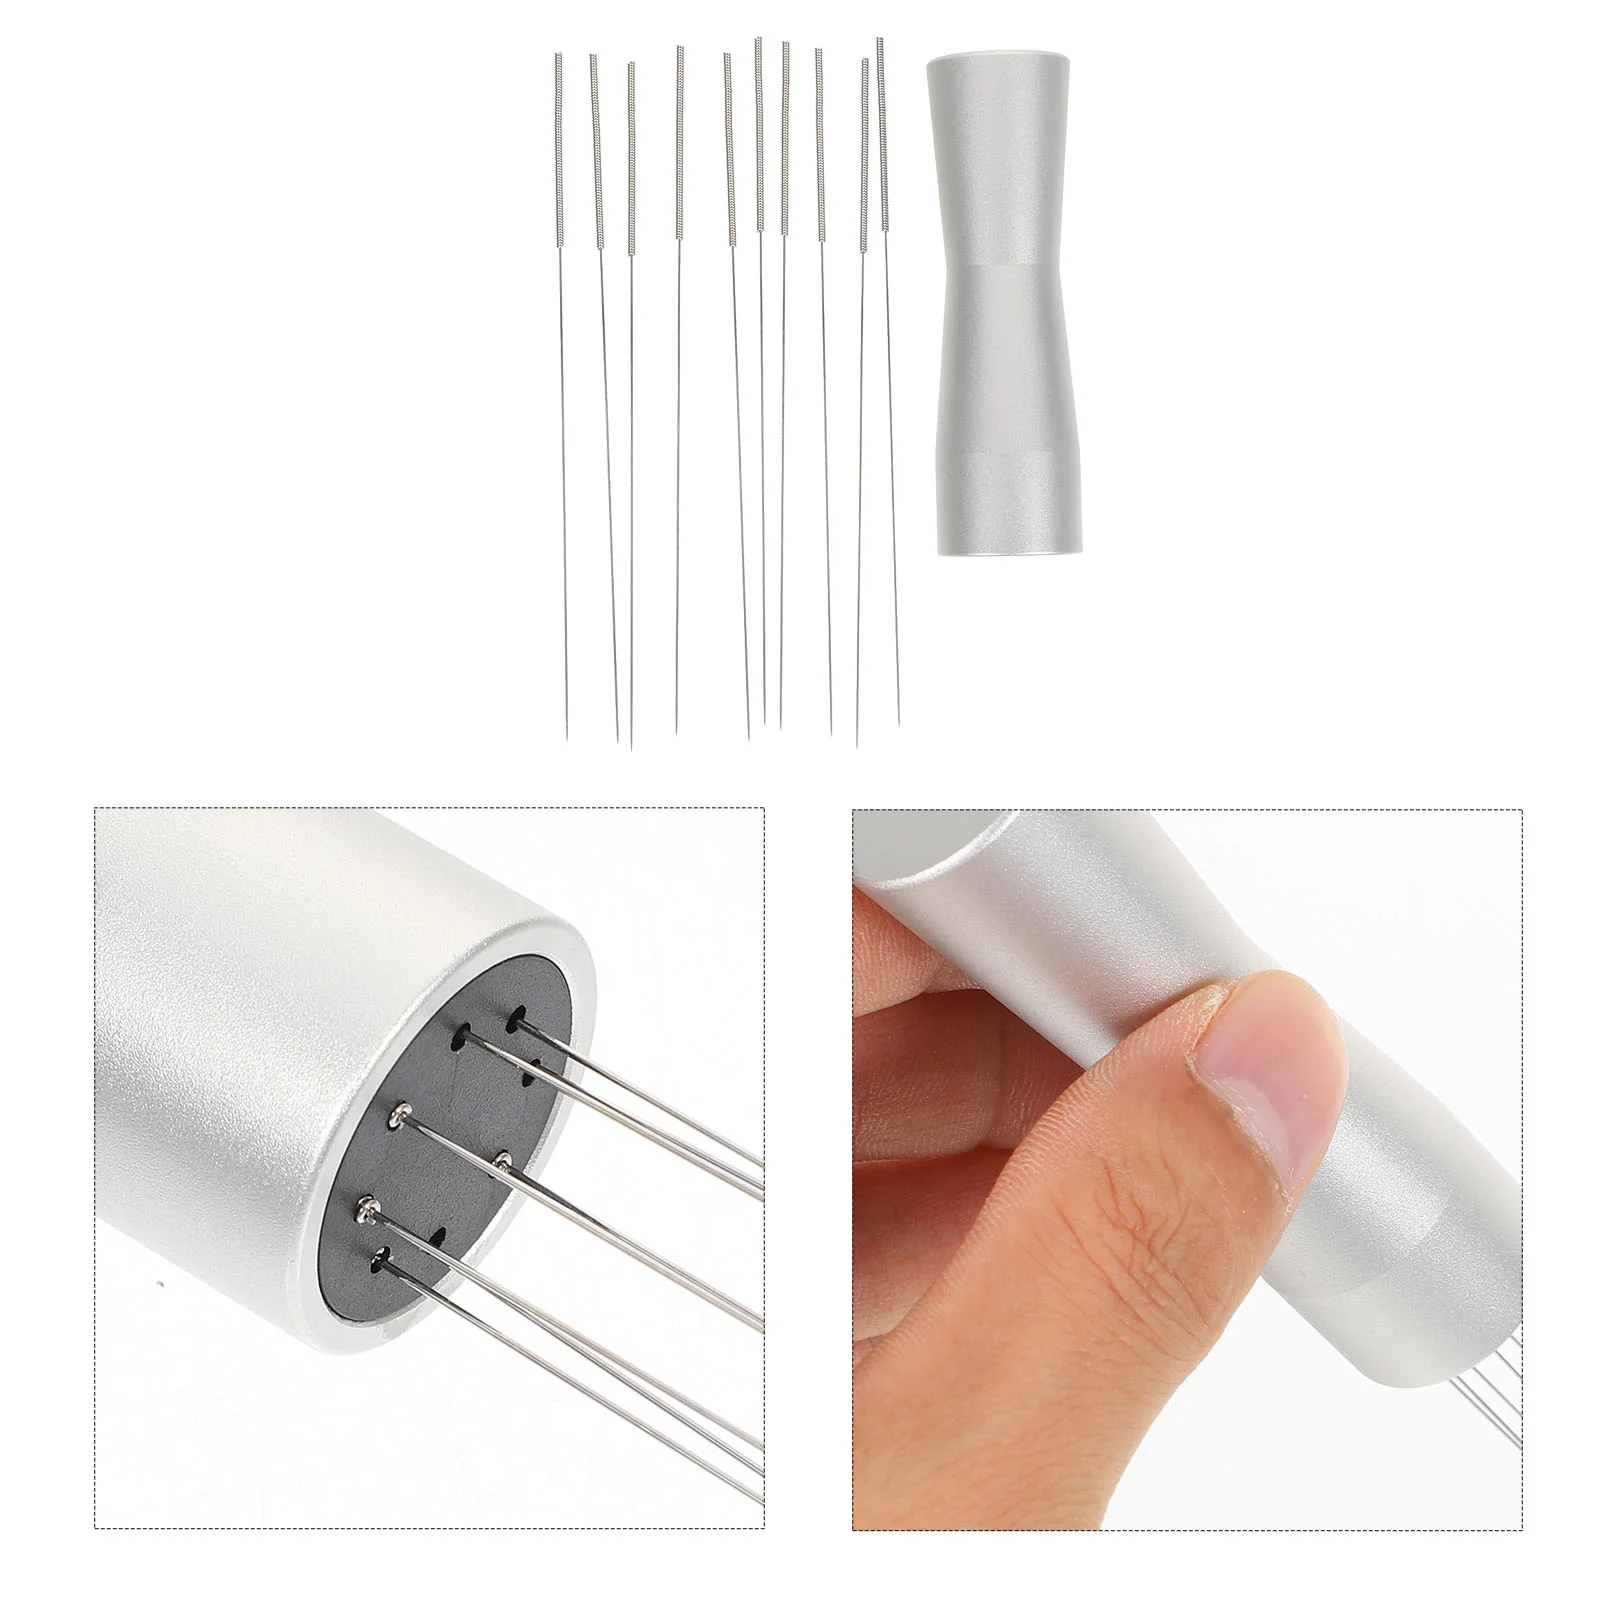 

Coffee Espresso Stirrer Tool Needle Distribution Tamper Stirring Distributor Whisk Hand Wdt Stirrers Tampers Tools Professional